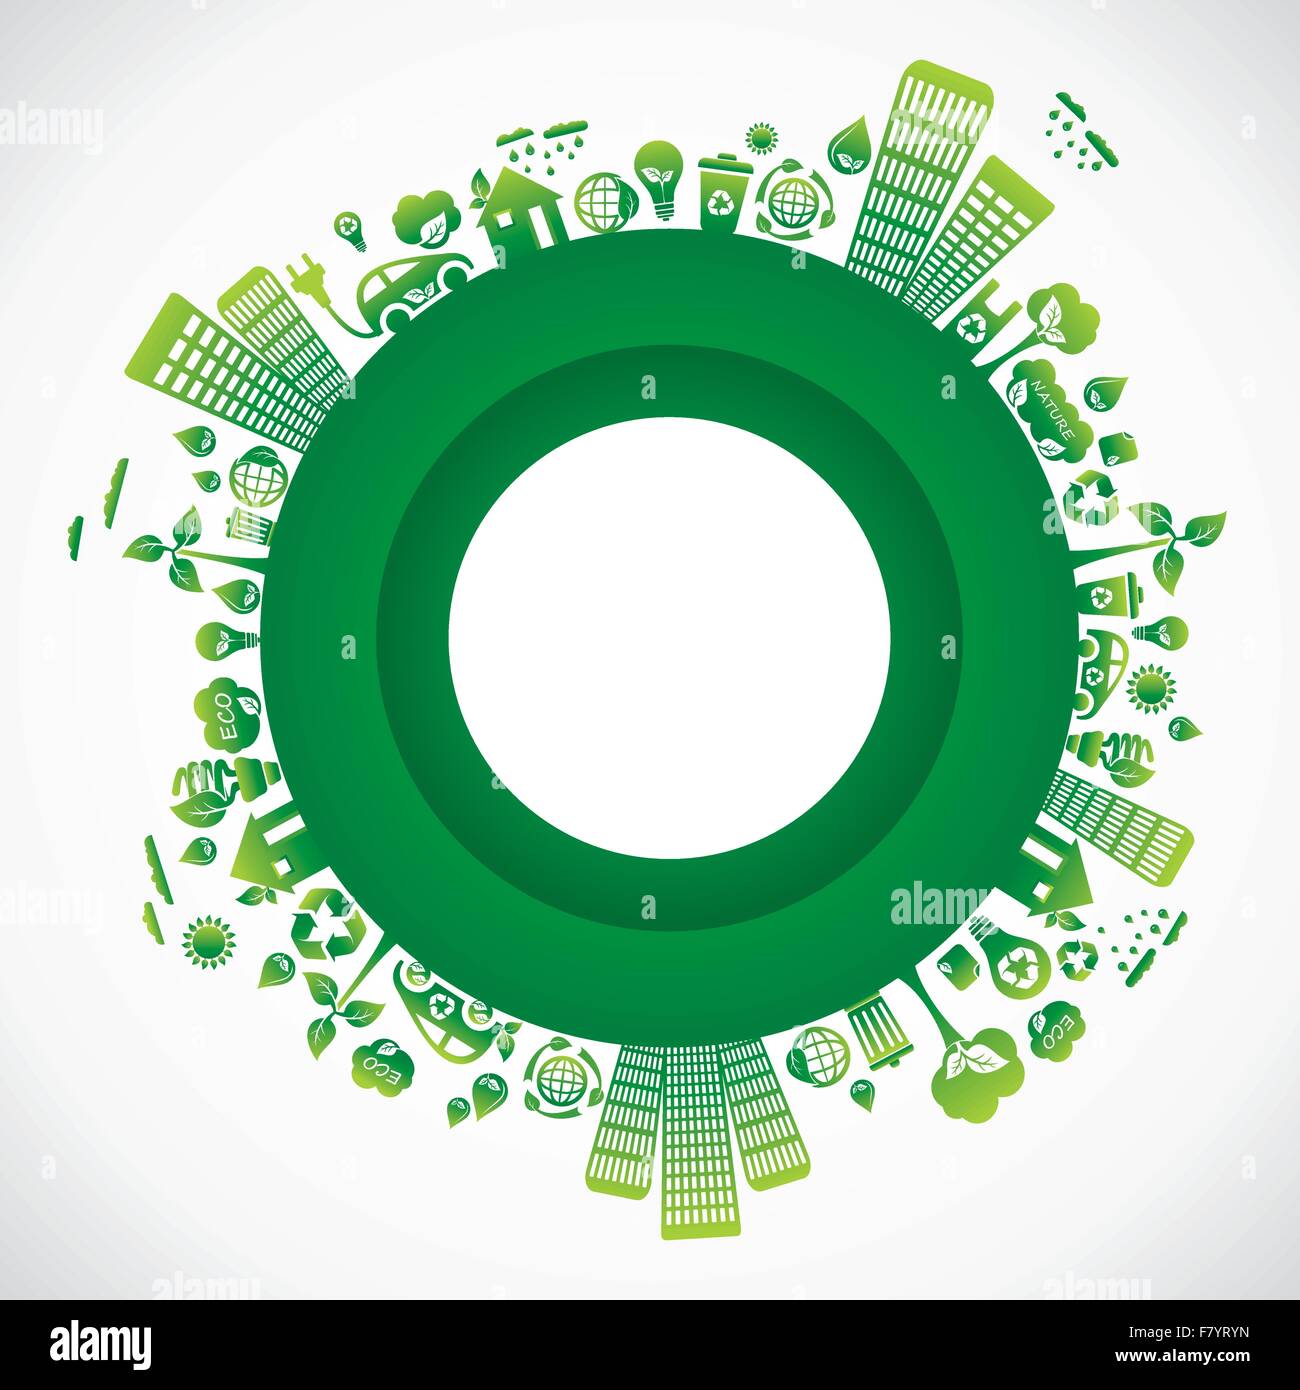 green city in round style Stock Vector